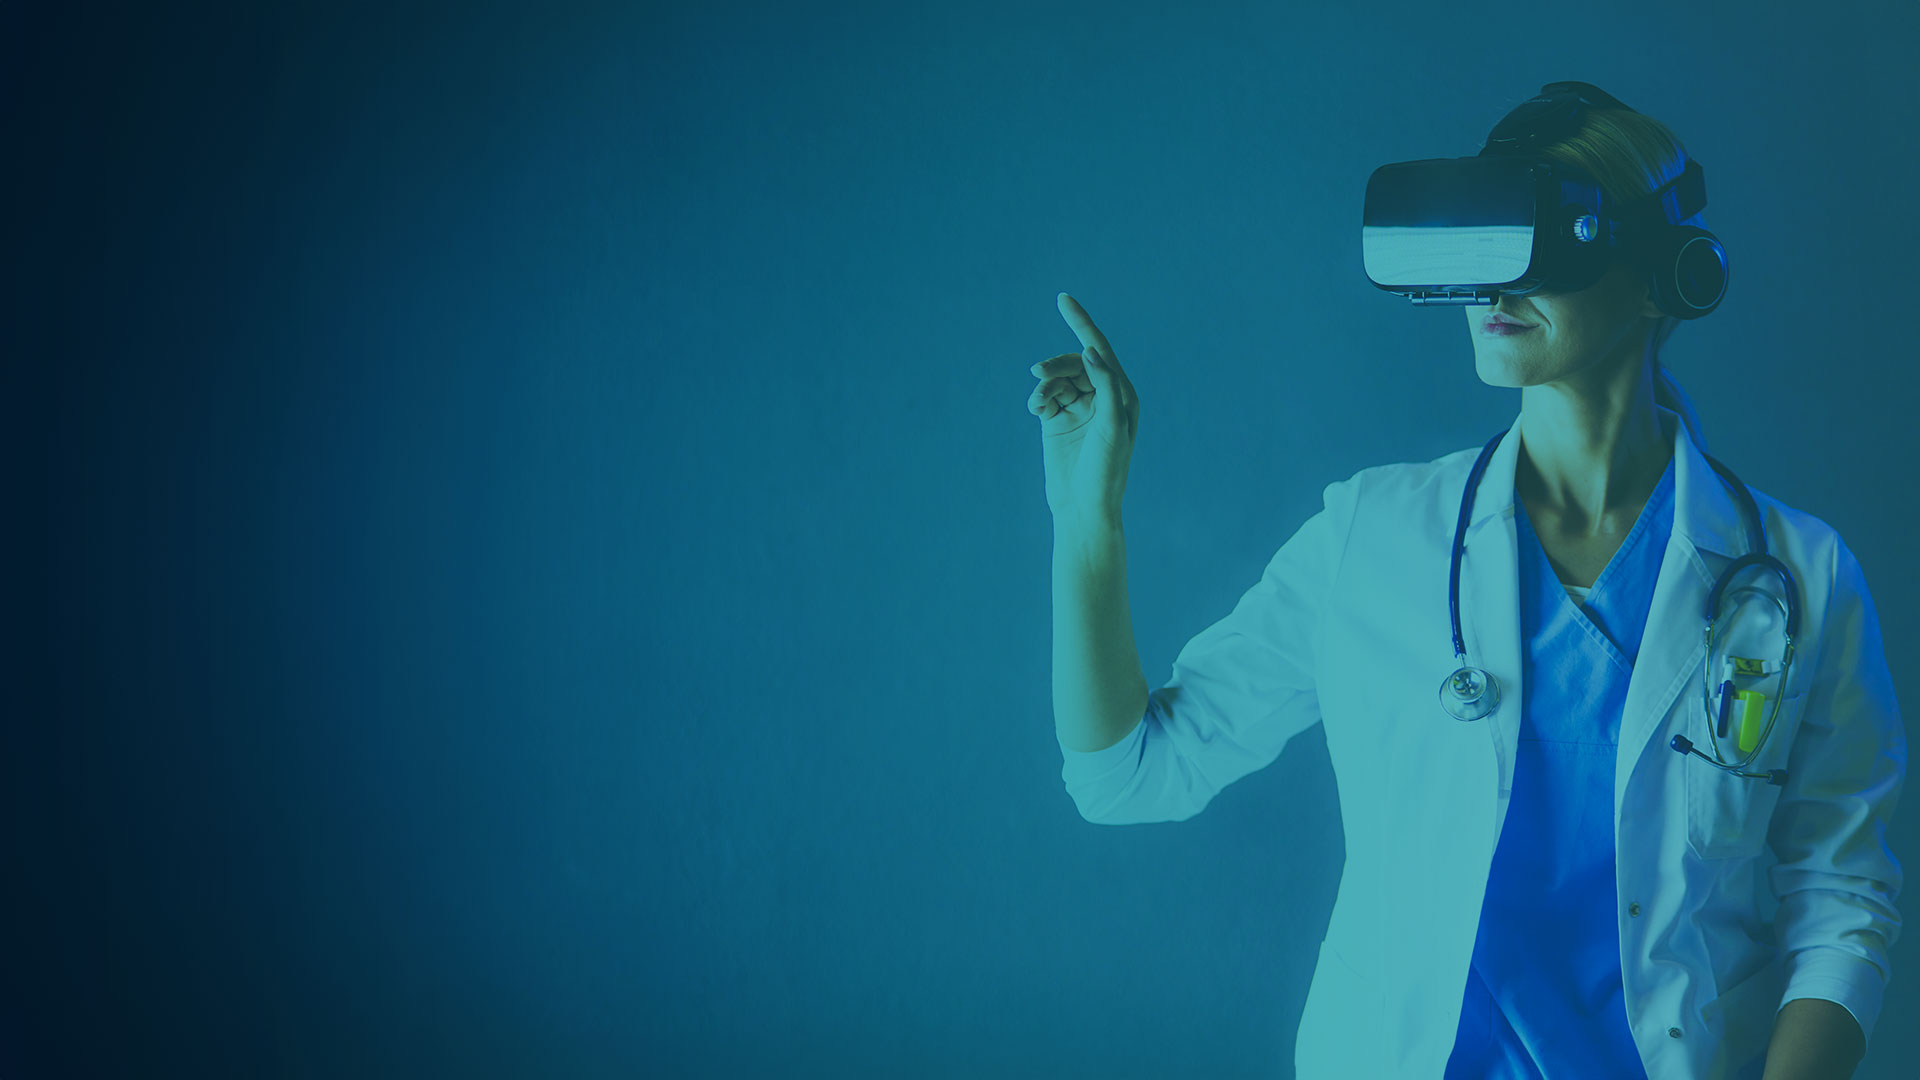 Treat Chronic Pain and Promote Patient Independence with Virtual Reality